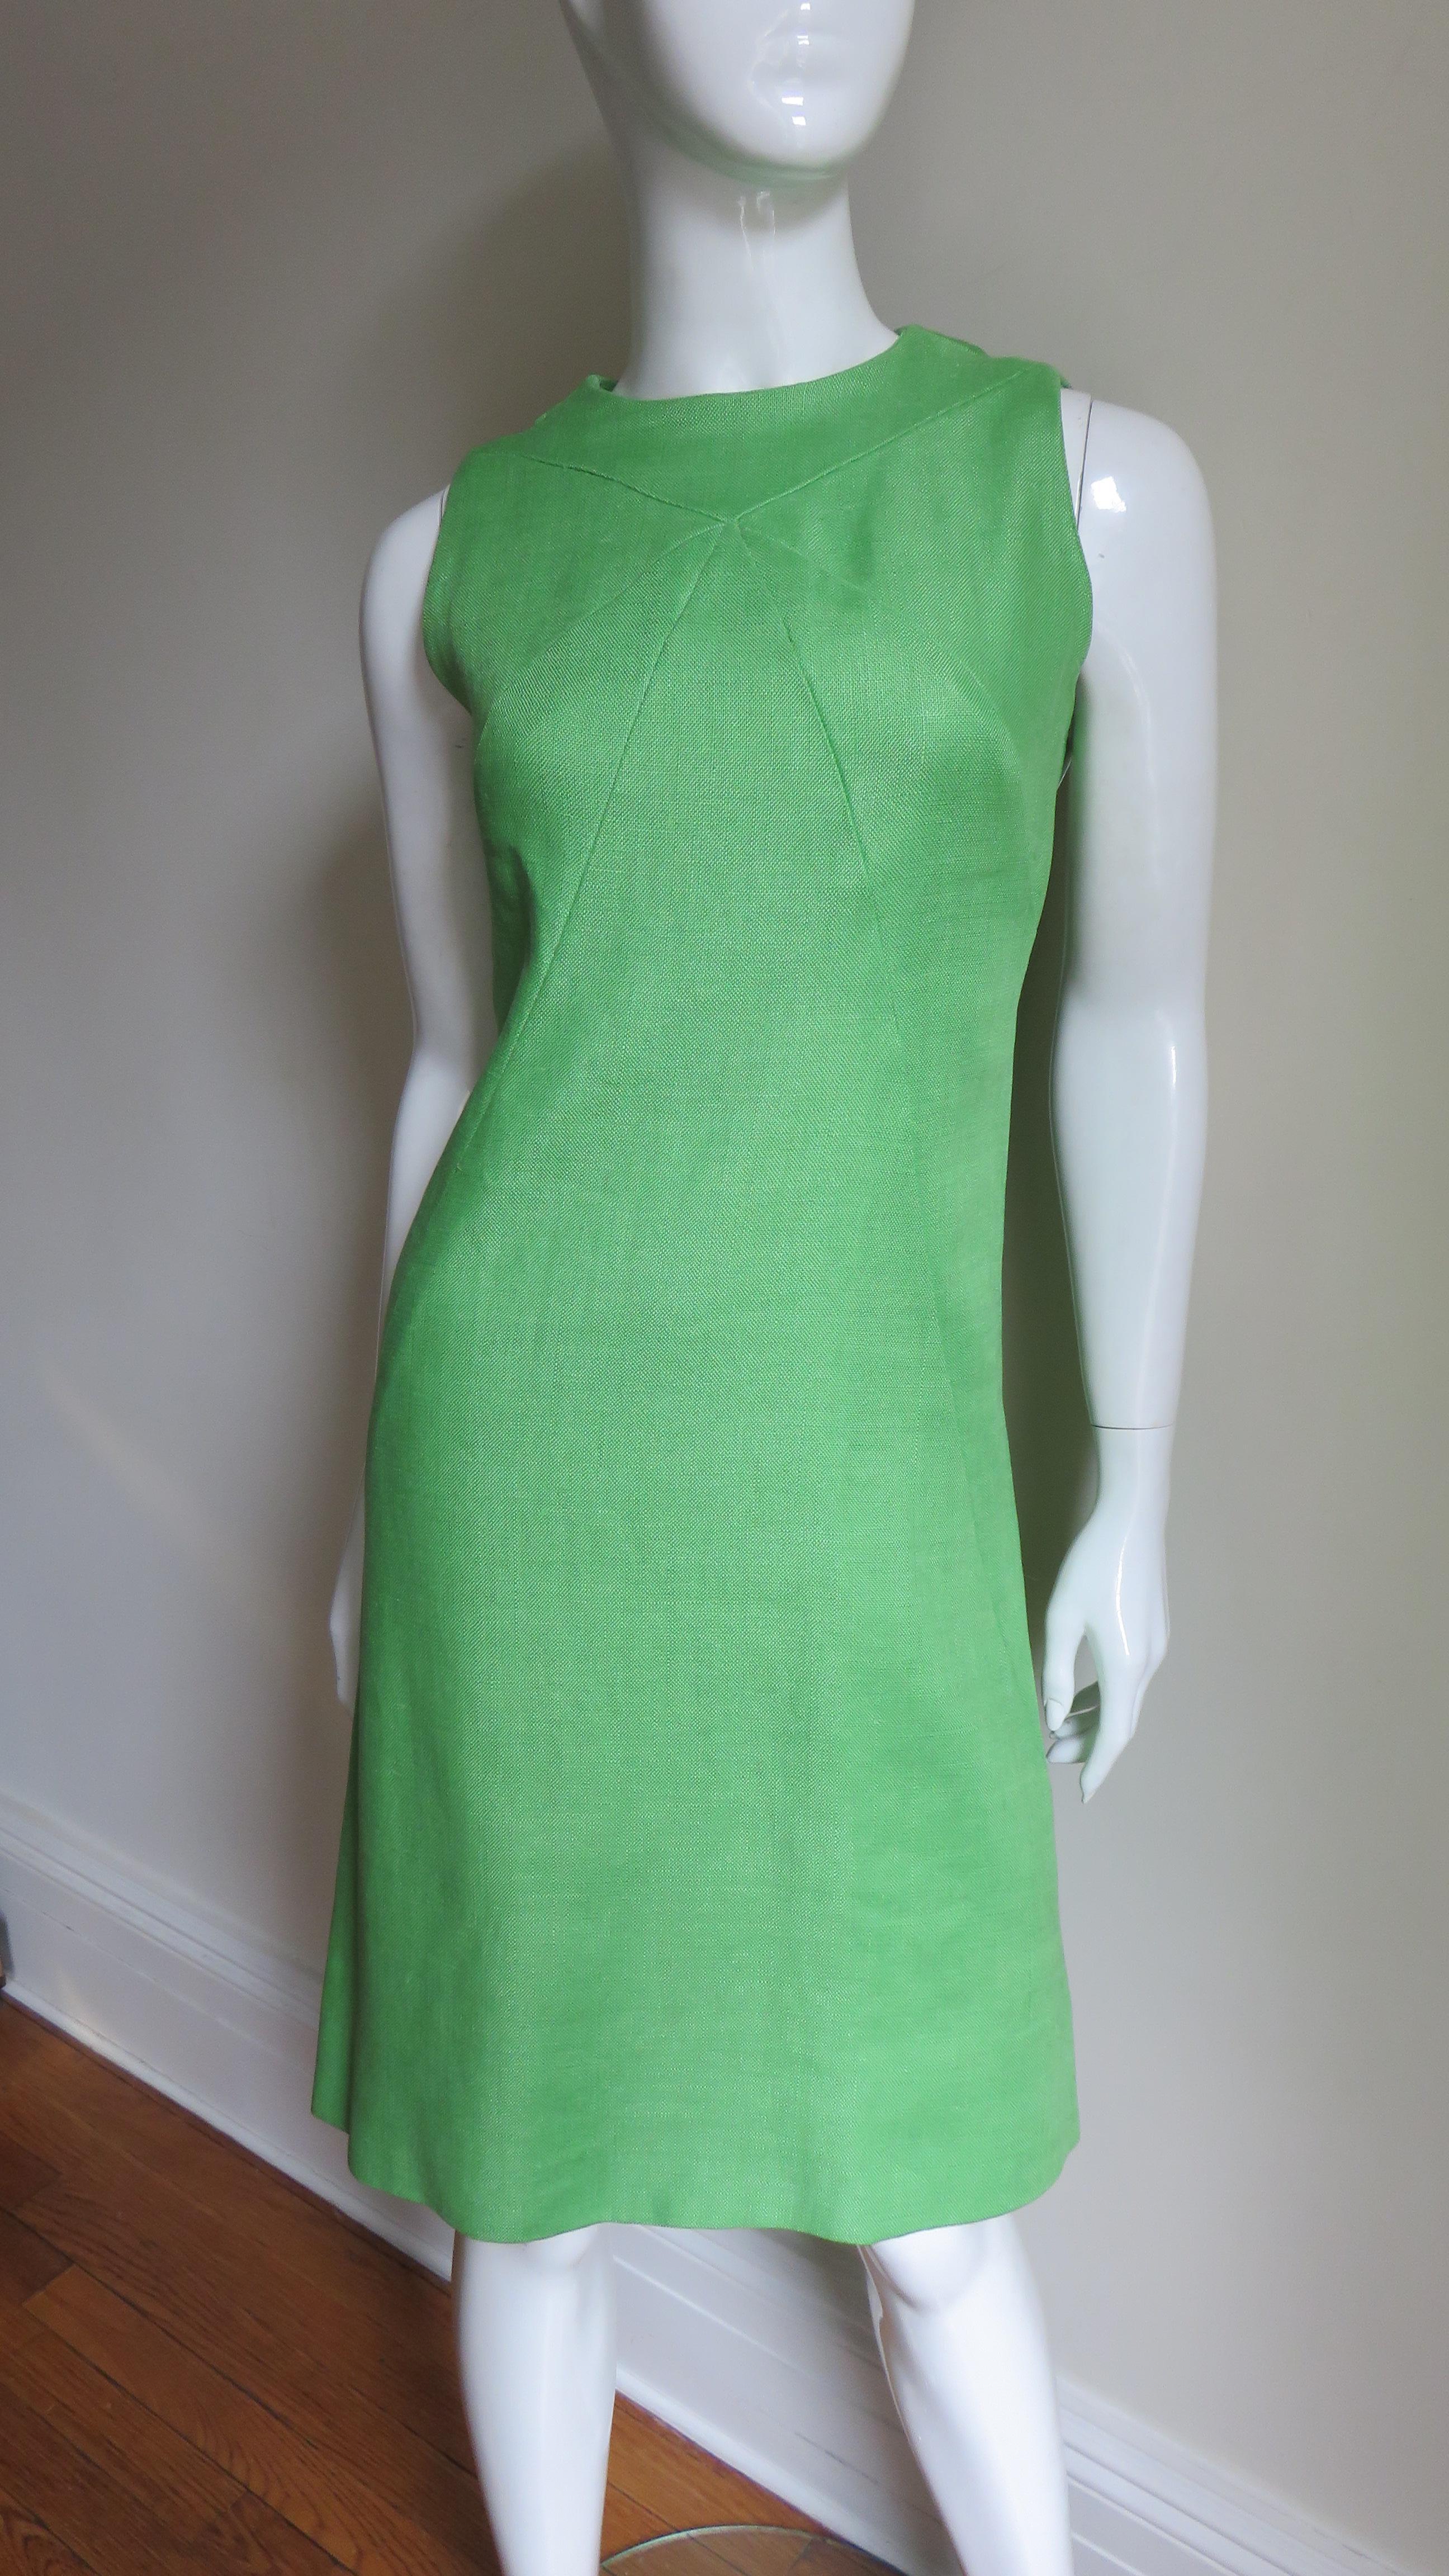 Donald Brooks 1960s Geometric Seams Dress In Good Condition For Sale In Water Mill, NY